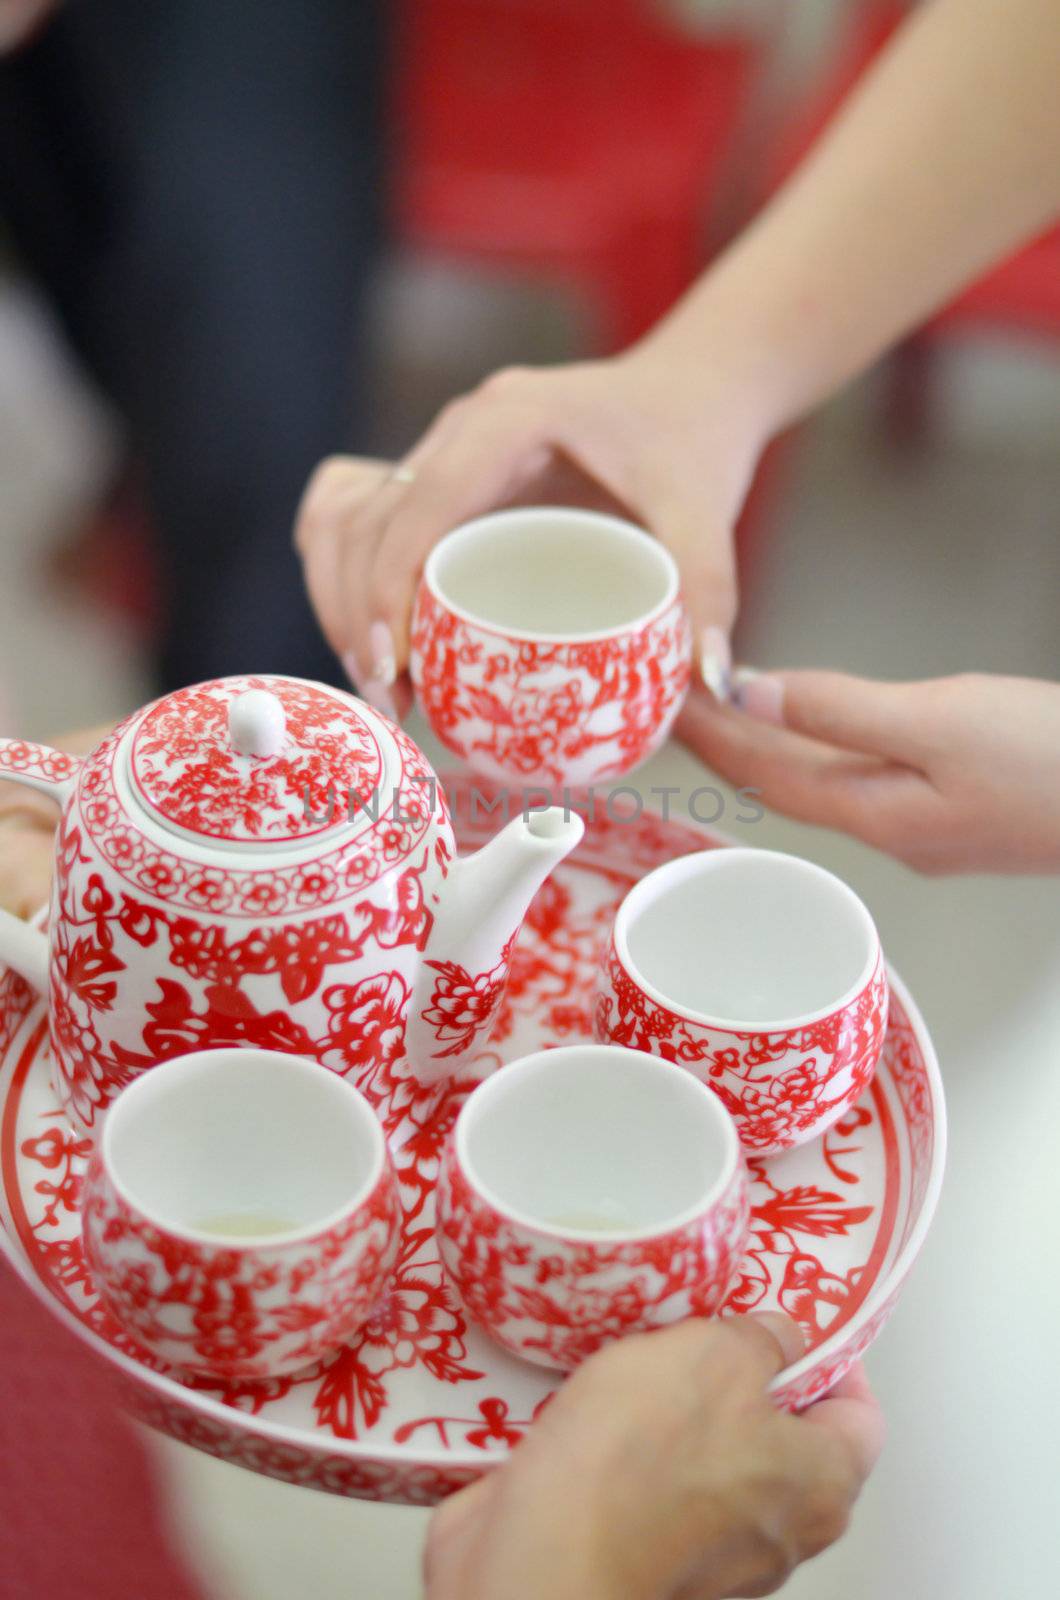 Chinese Tea ceremony is performed during a Chinese wedding or Chinese New Year.